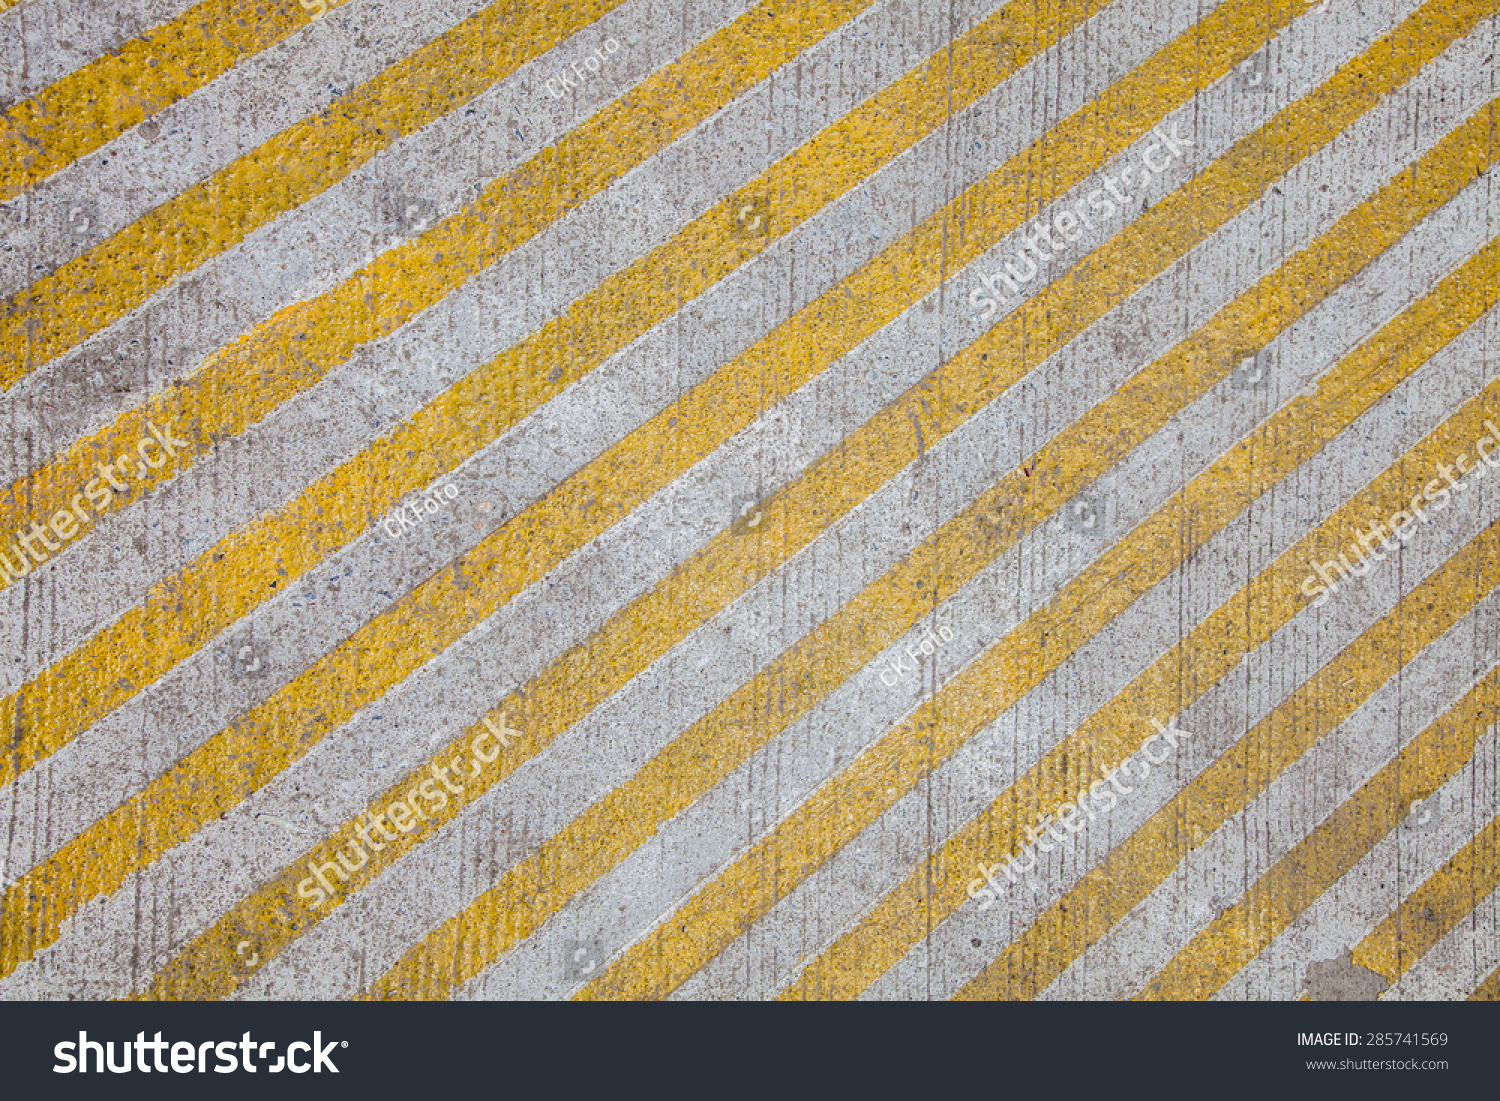 yellow line on the road texture #285741569